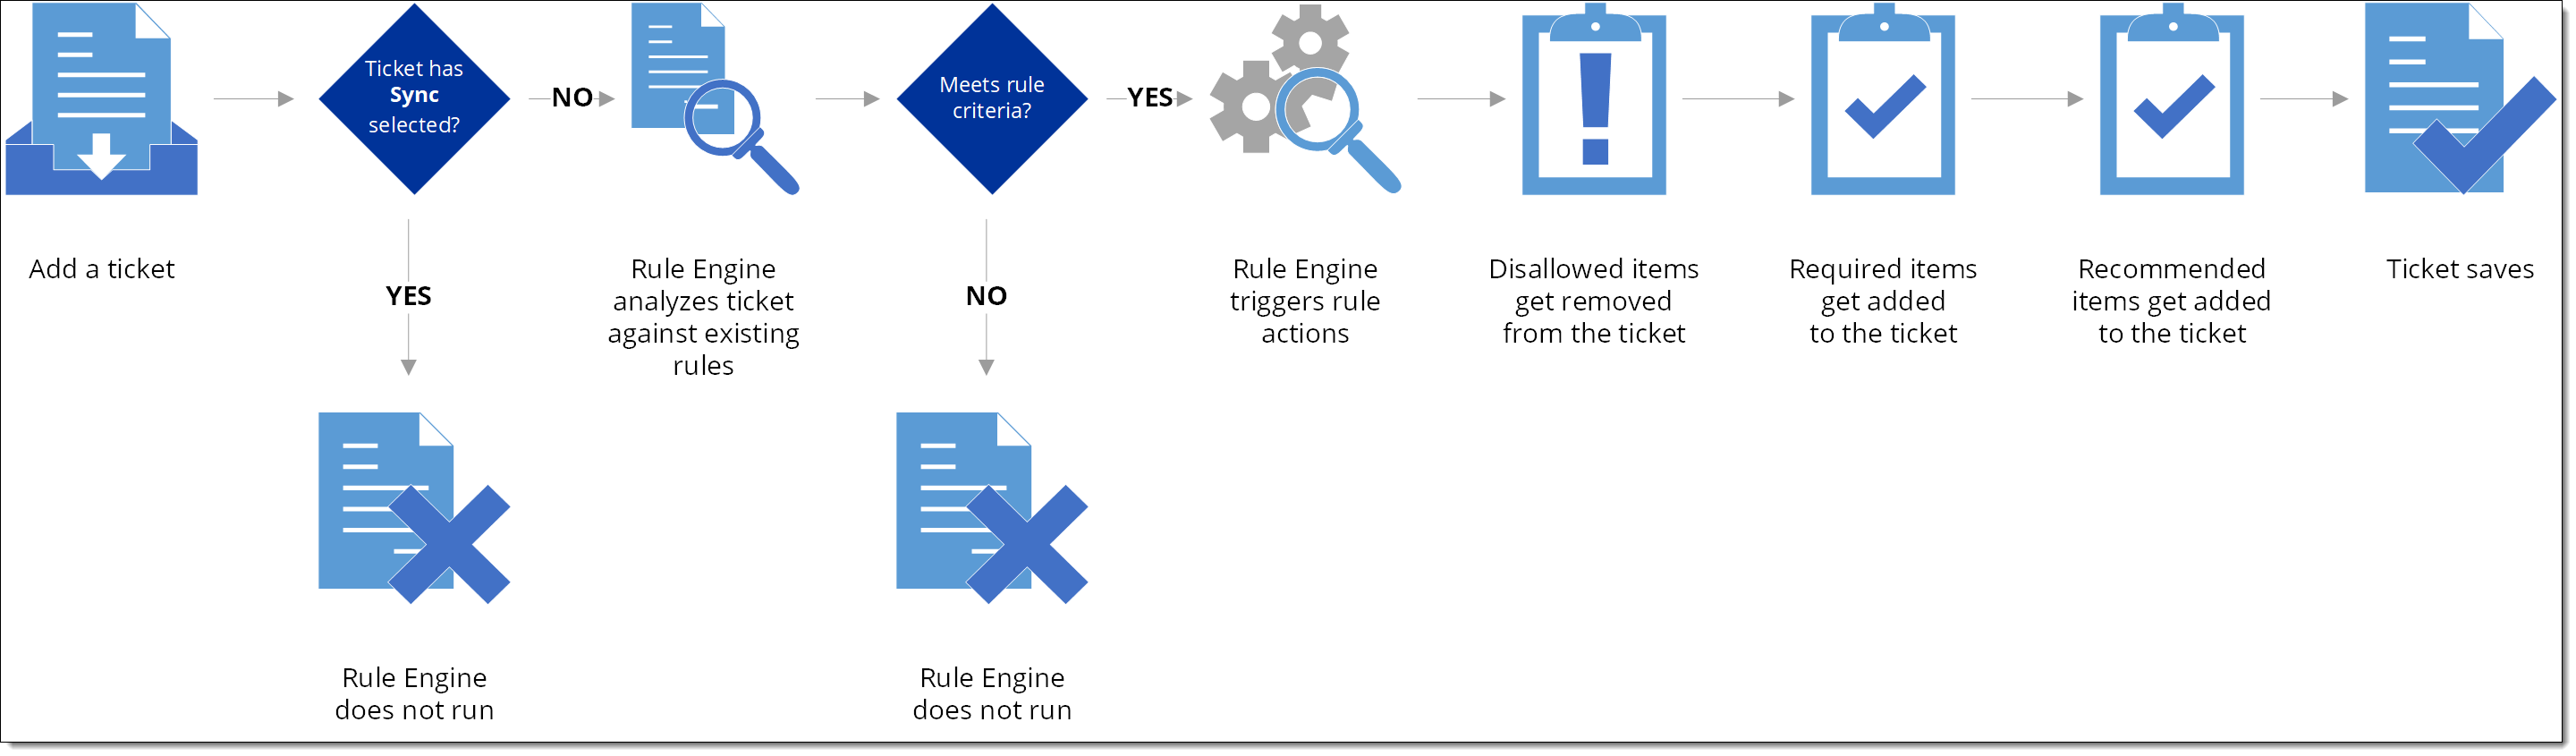 Graphic showing the rule engine process when adding a ticket in FieldFX Back Office